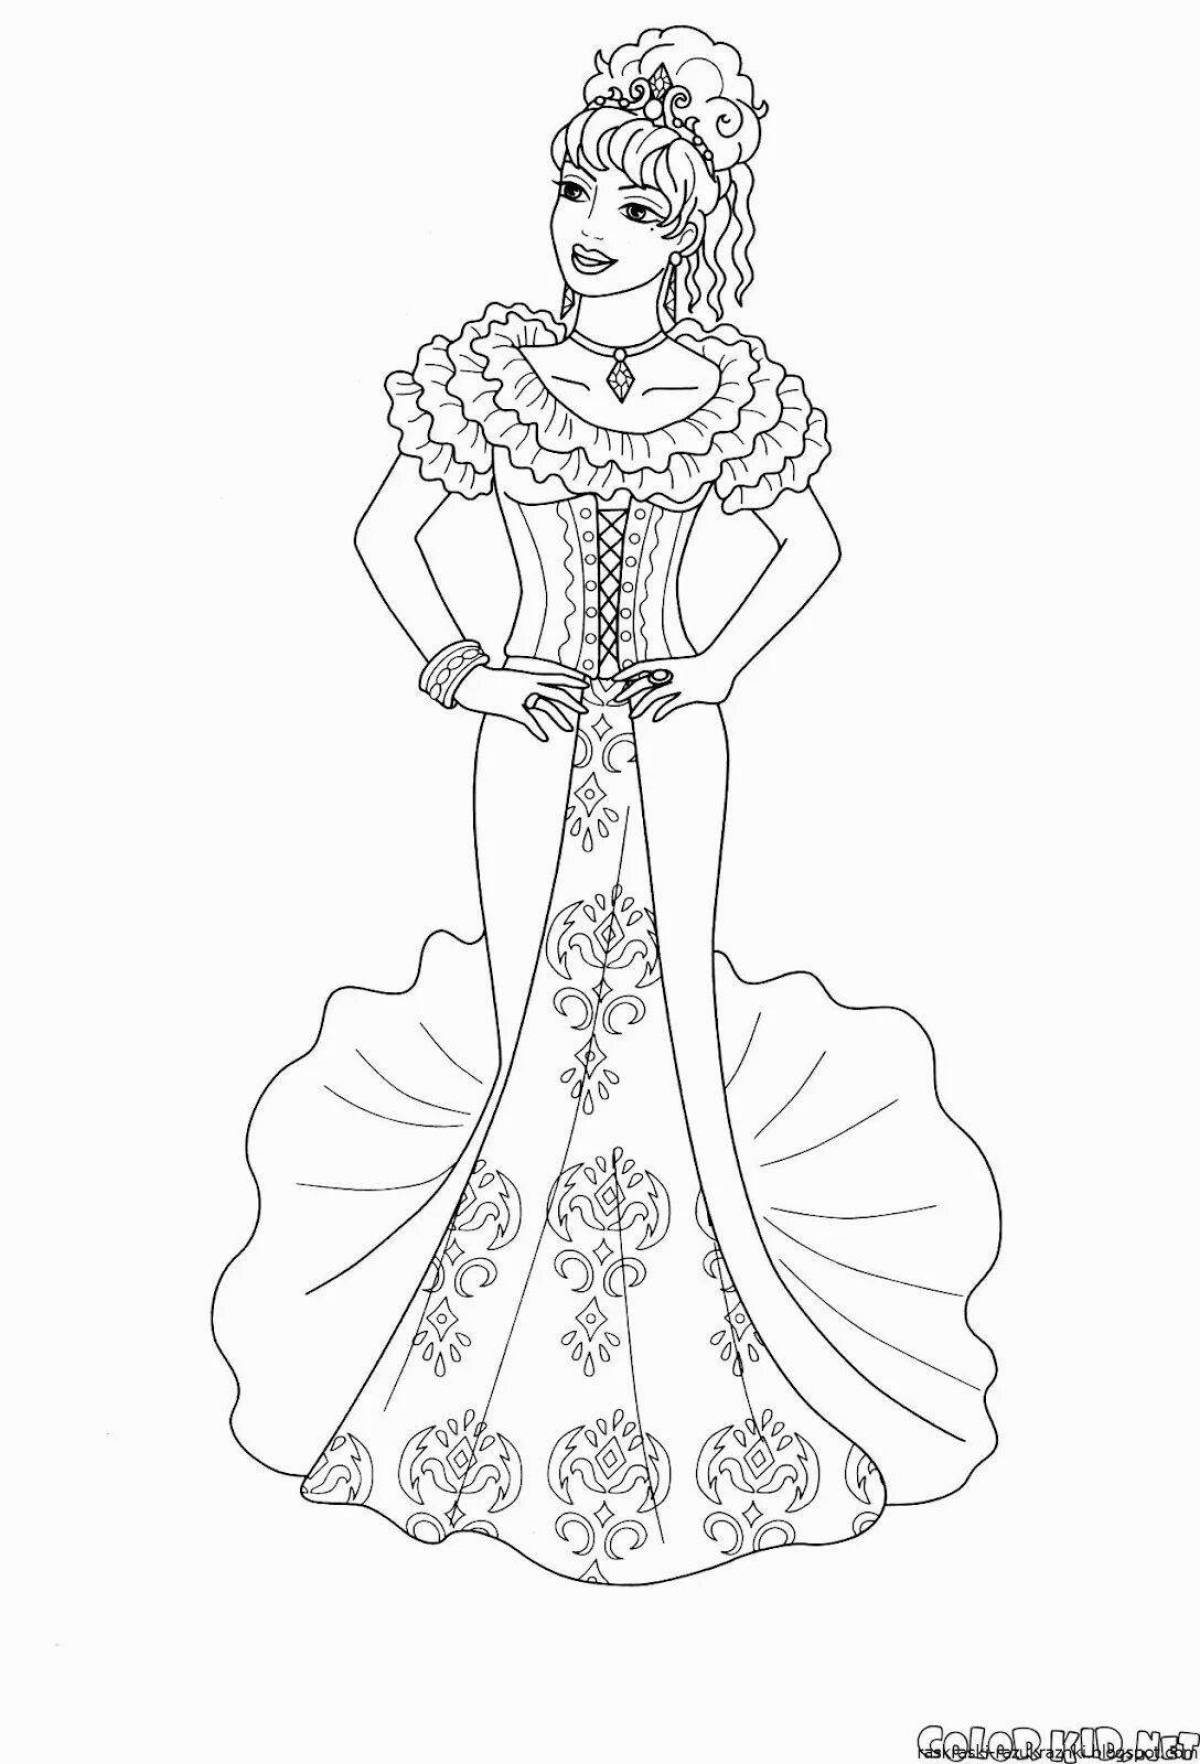 Shiny coloring book for girls princesses in beautiful dresses